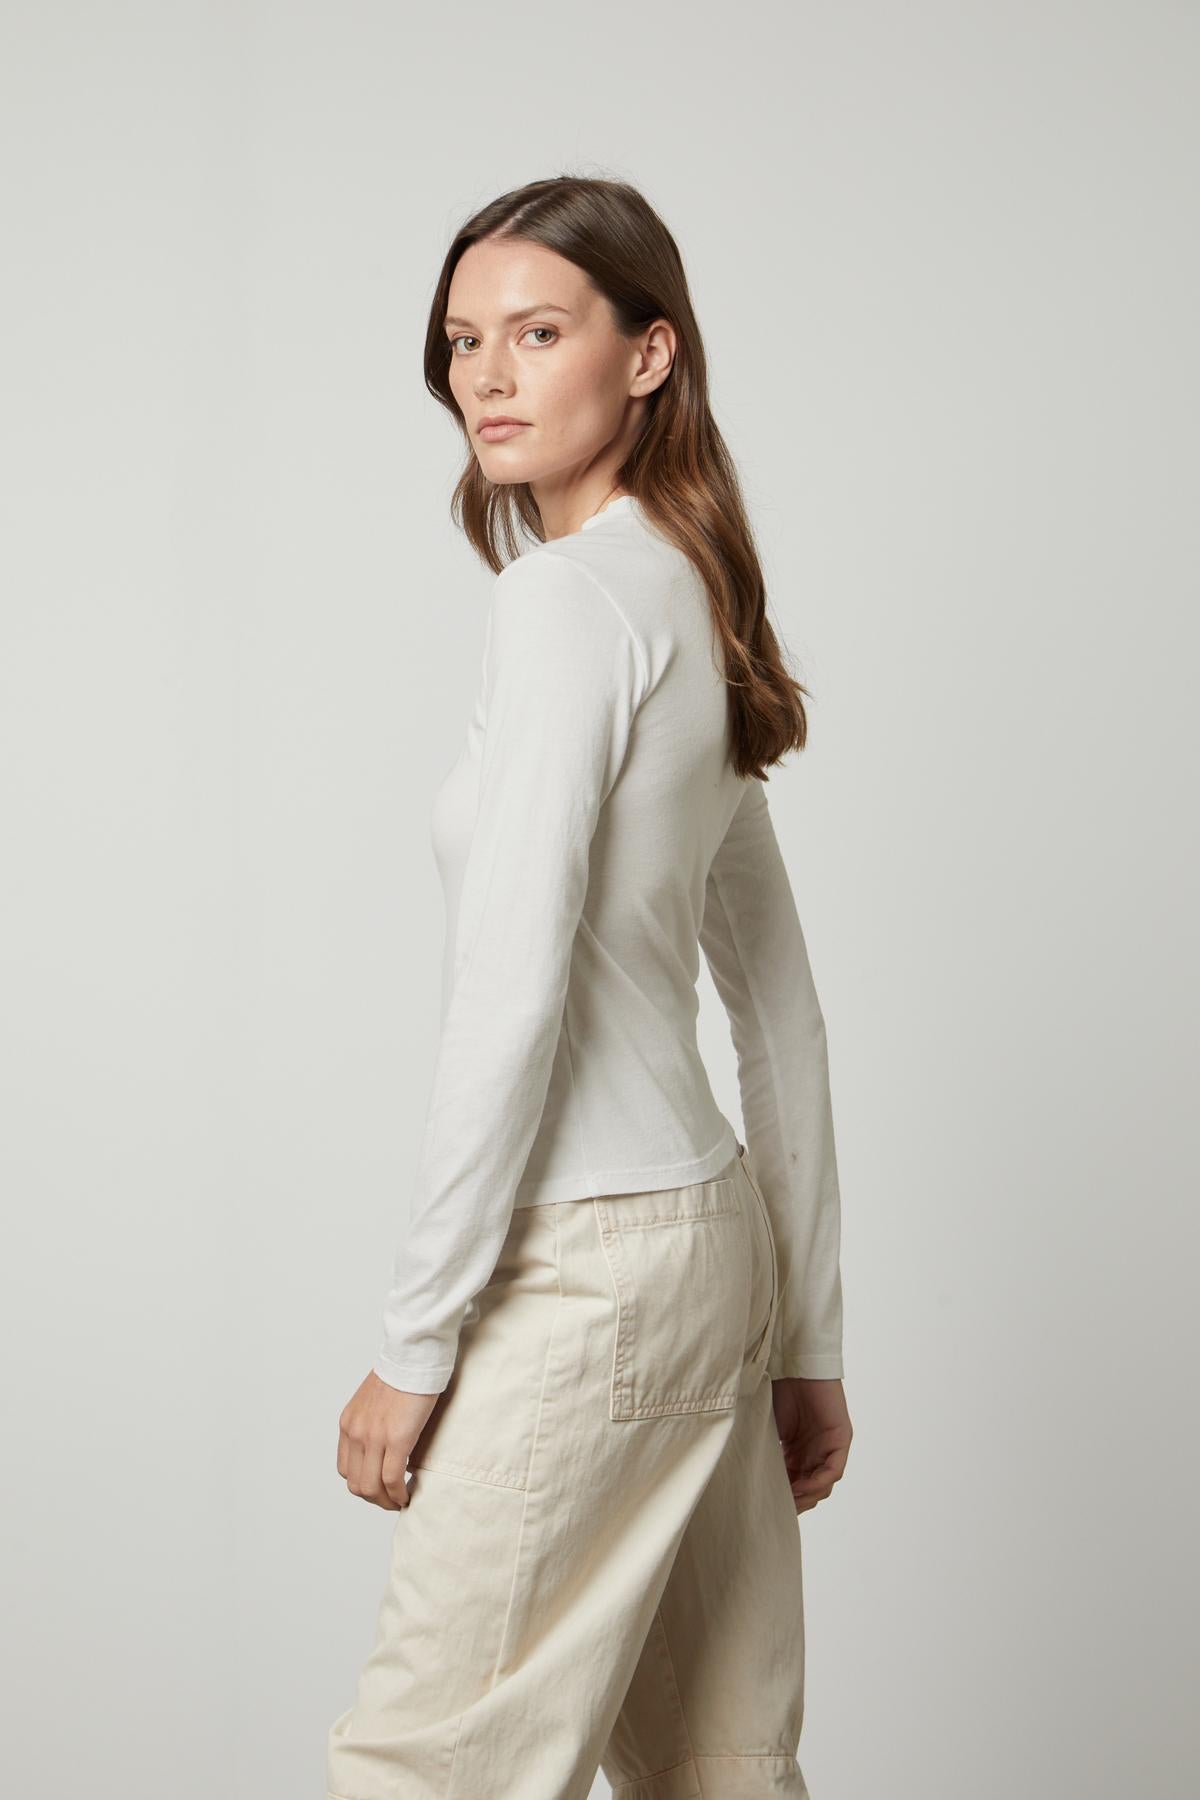 The silhouette is wearing a white Linny Mock Neck Tee top by Velvet by Graham & Spencer and beige trousers, providing a perfect fit.-35660506726593